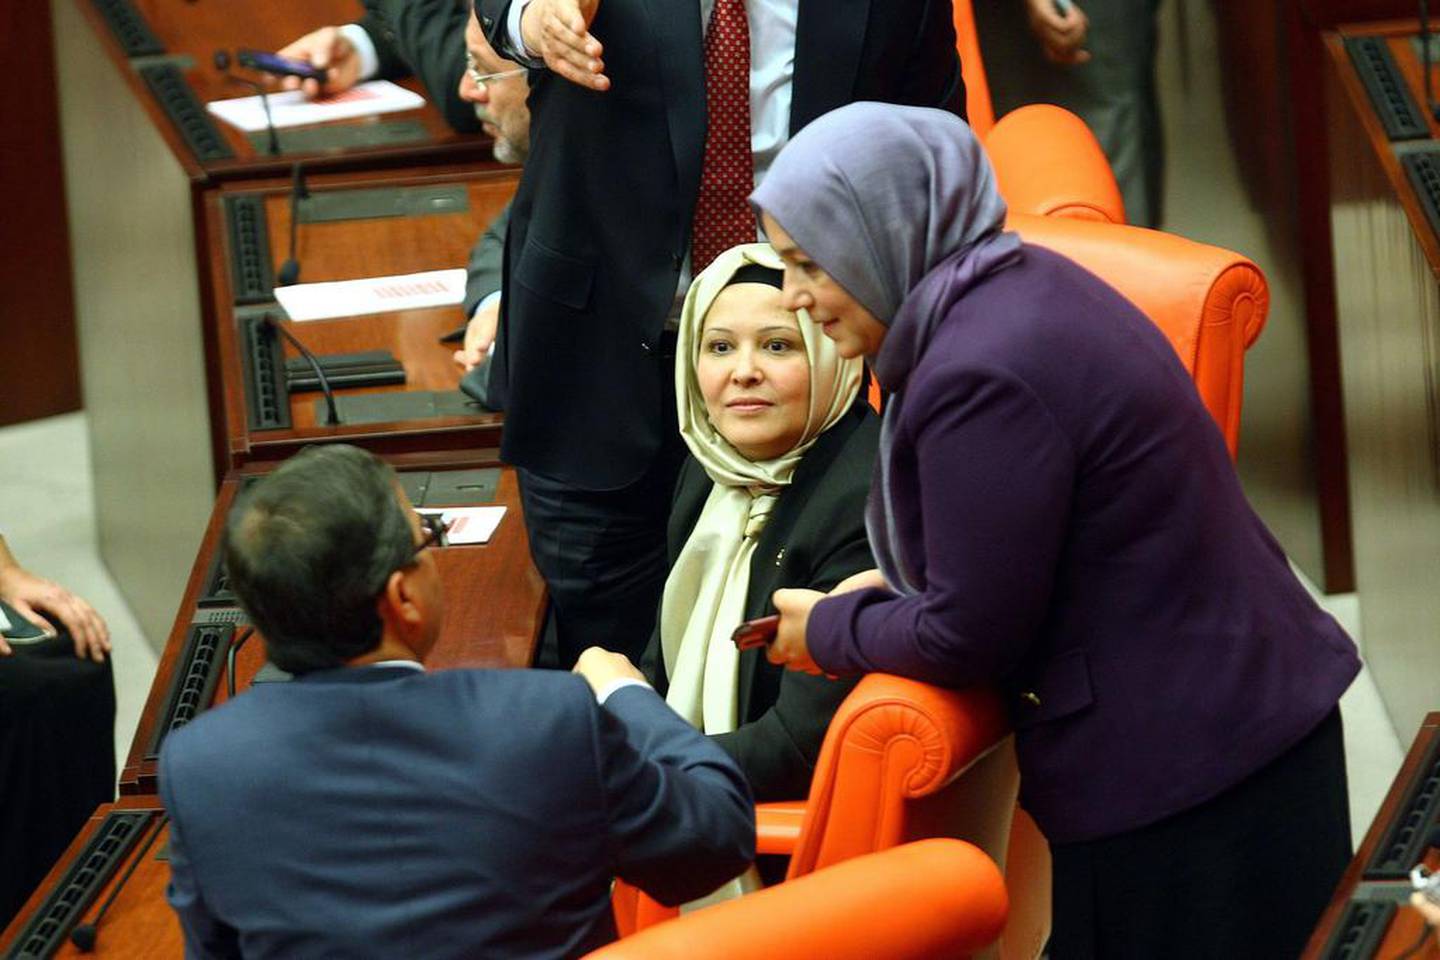 Turkey's ruling AKP MPs Nurcan Dalbudak, centre, and Sevde Beyazit Kacar, right, attend a general assembly at the parliament wearing headscarves on Thursday.  AFP 

